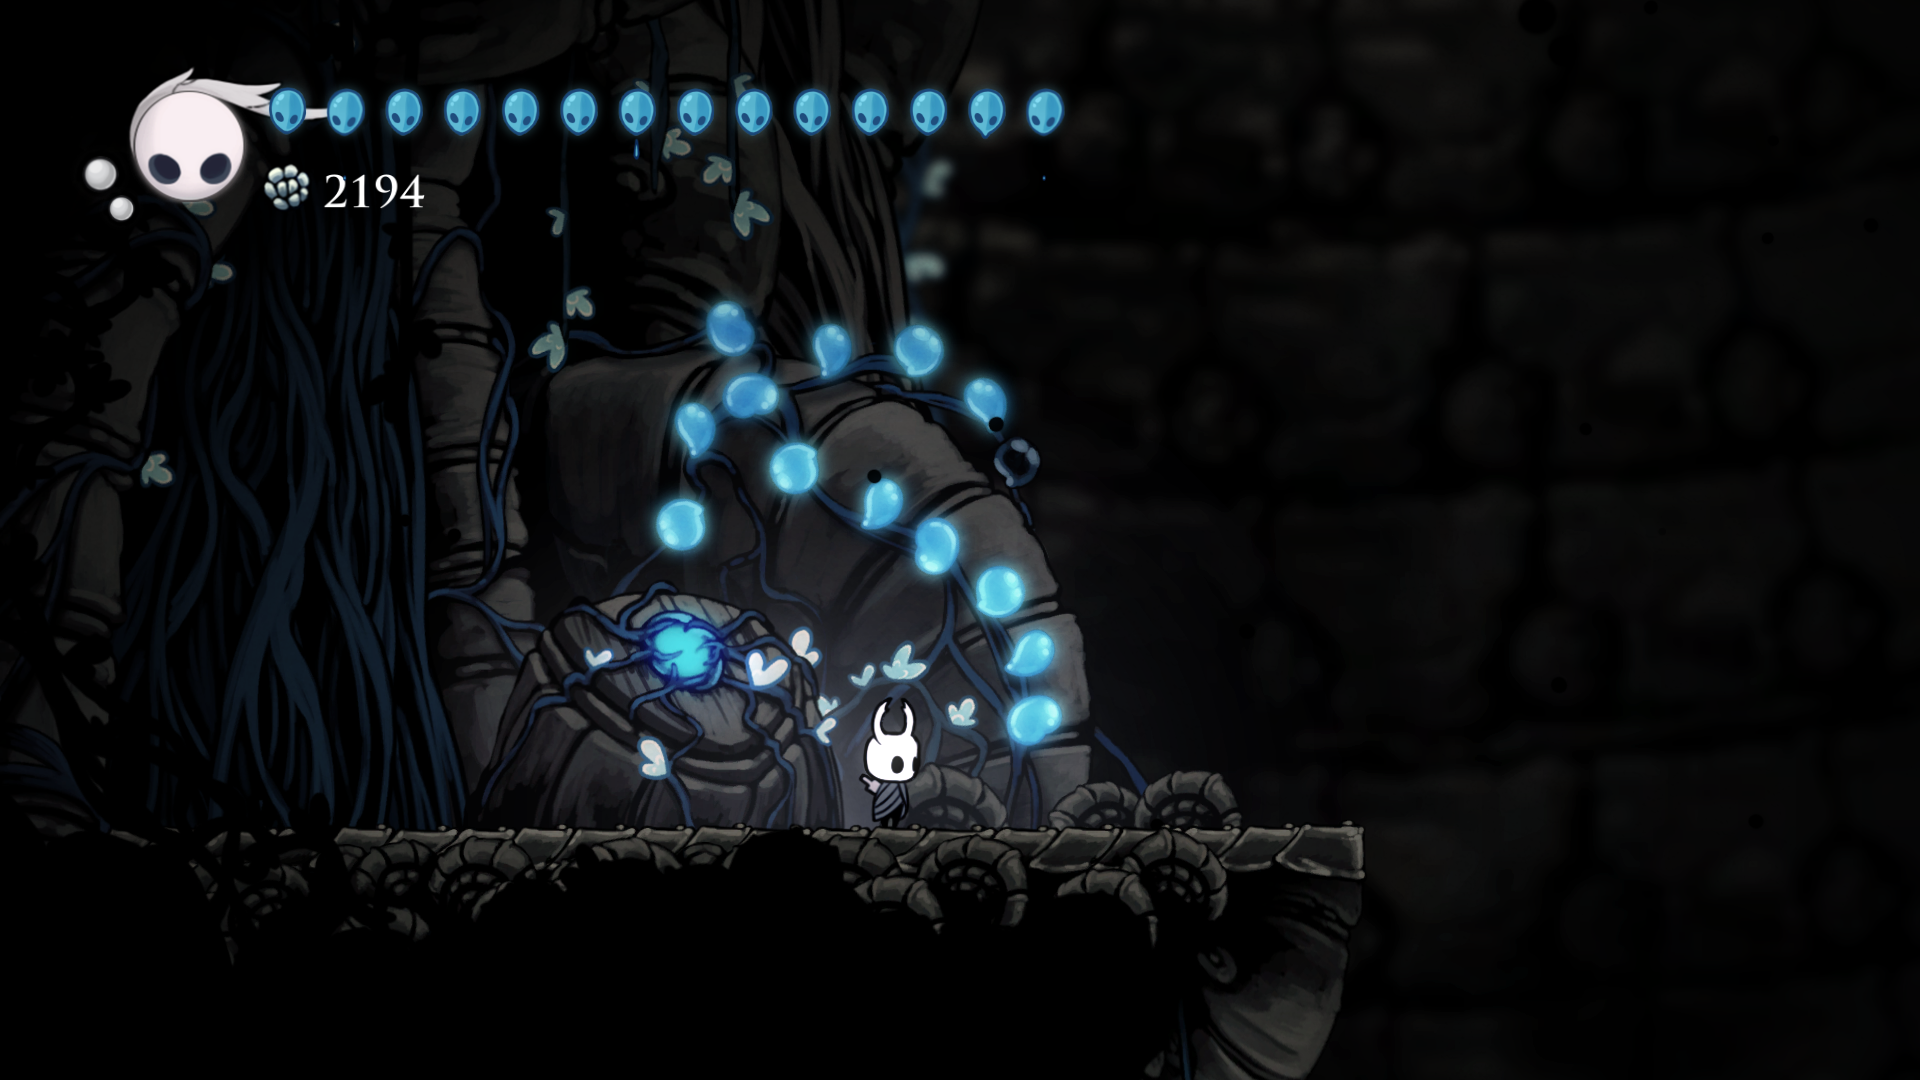 How to get through the abyss door with 14 lifeblood HollowKnight